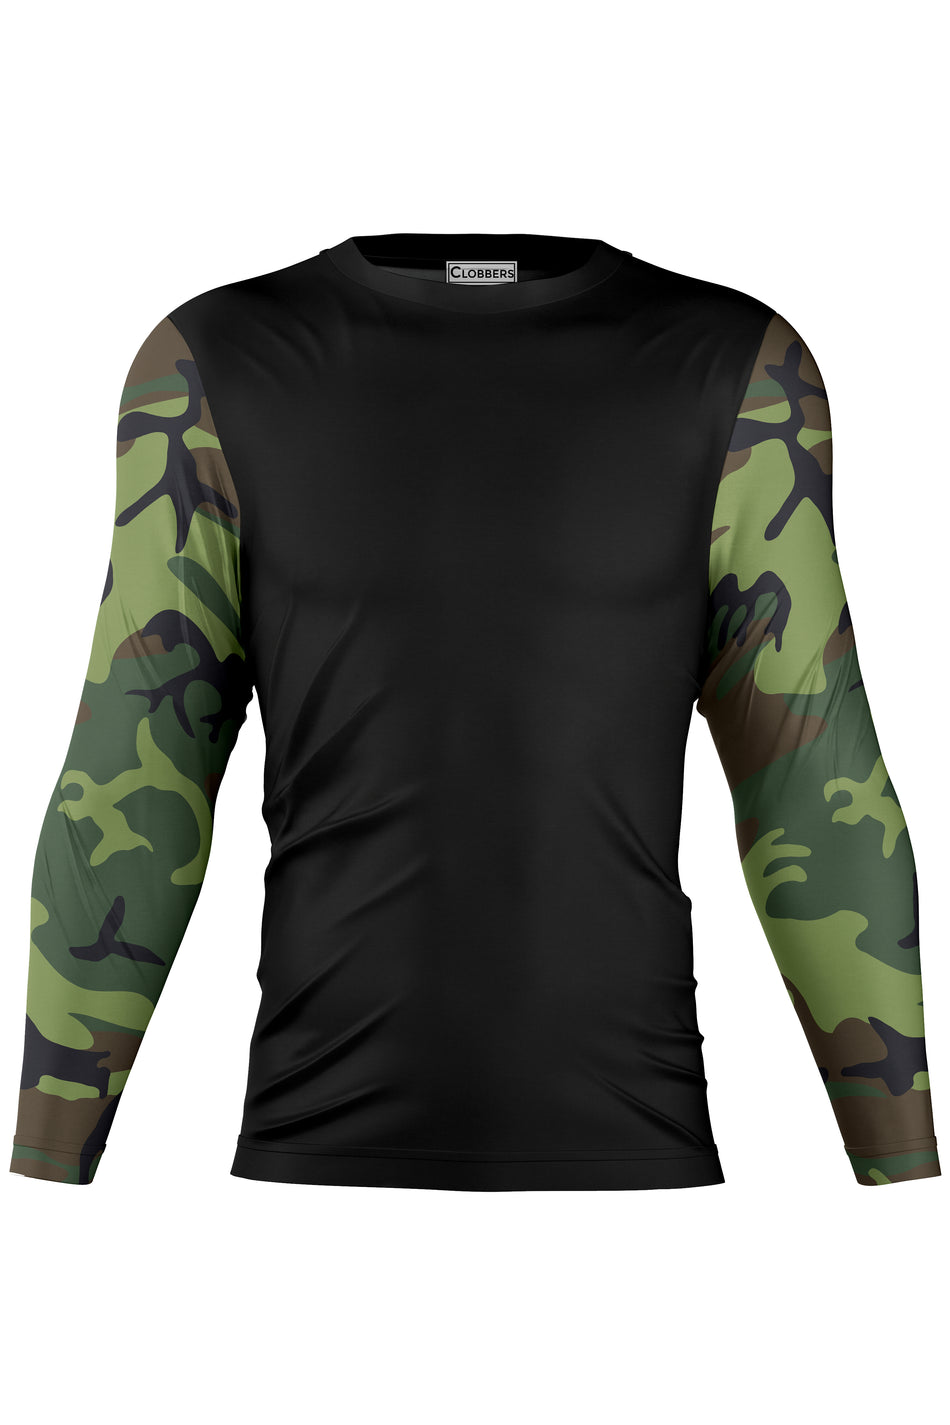 AOUTF - CAMUFLAGE FULL SLEEVES TSHIRT